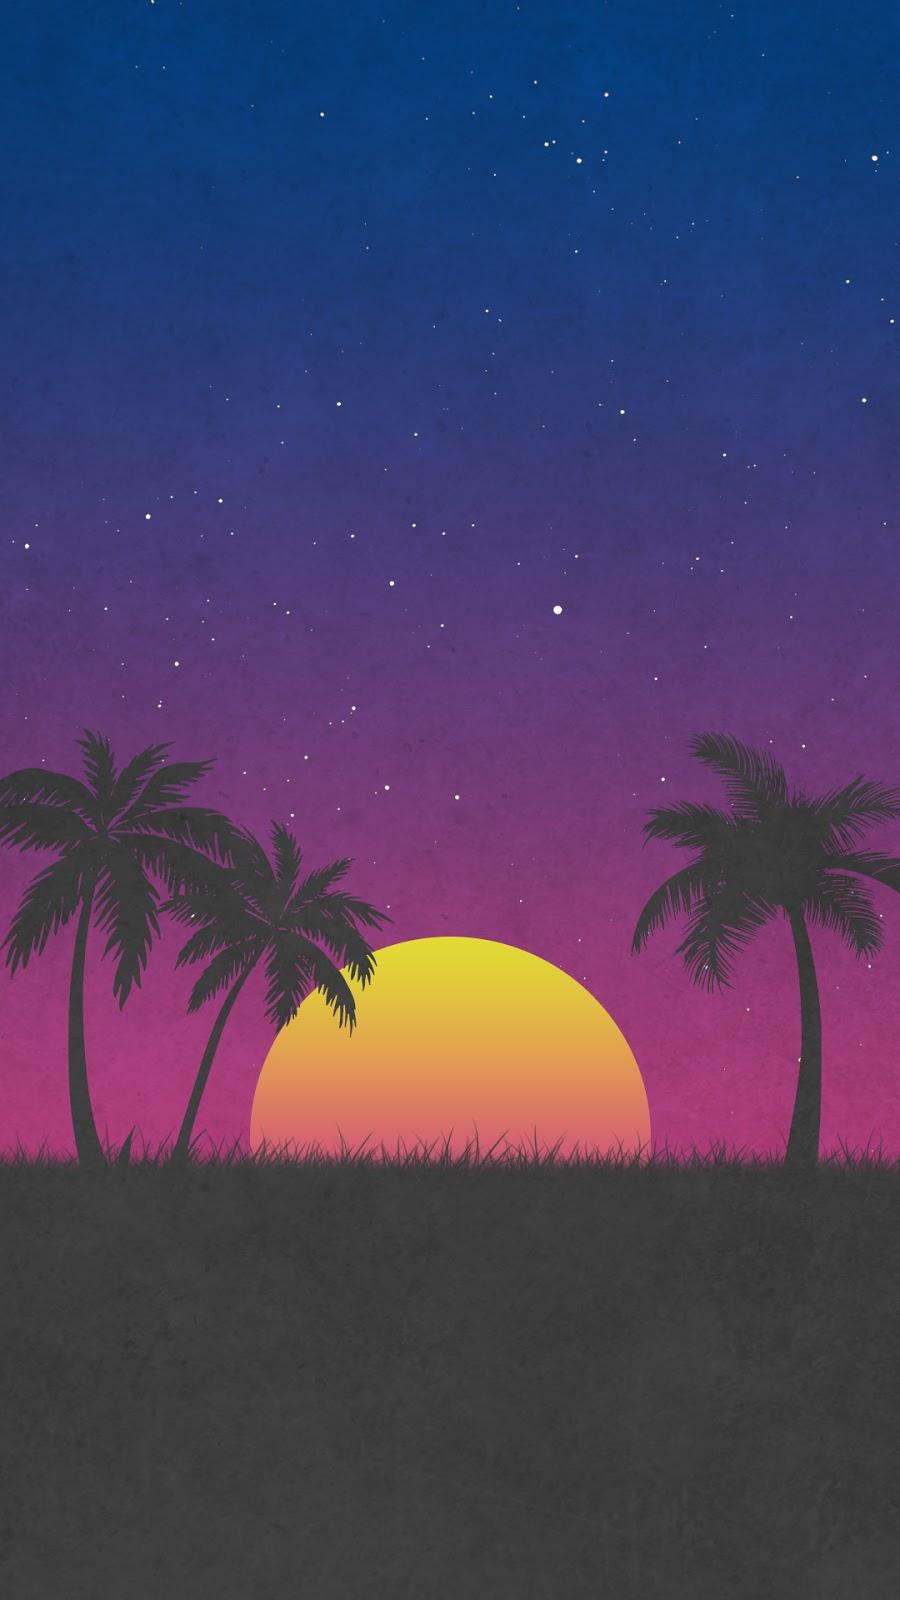 MINIMALIST PHONE WALLPAPER COLLECTION 189. Cool Wallpaper